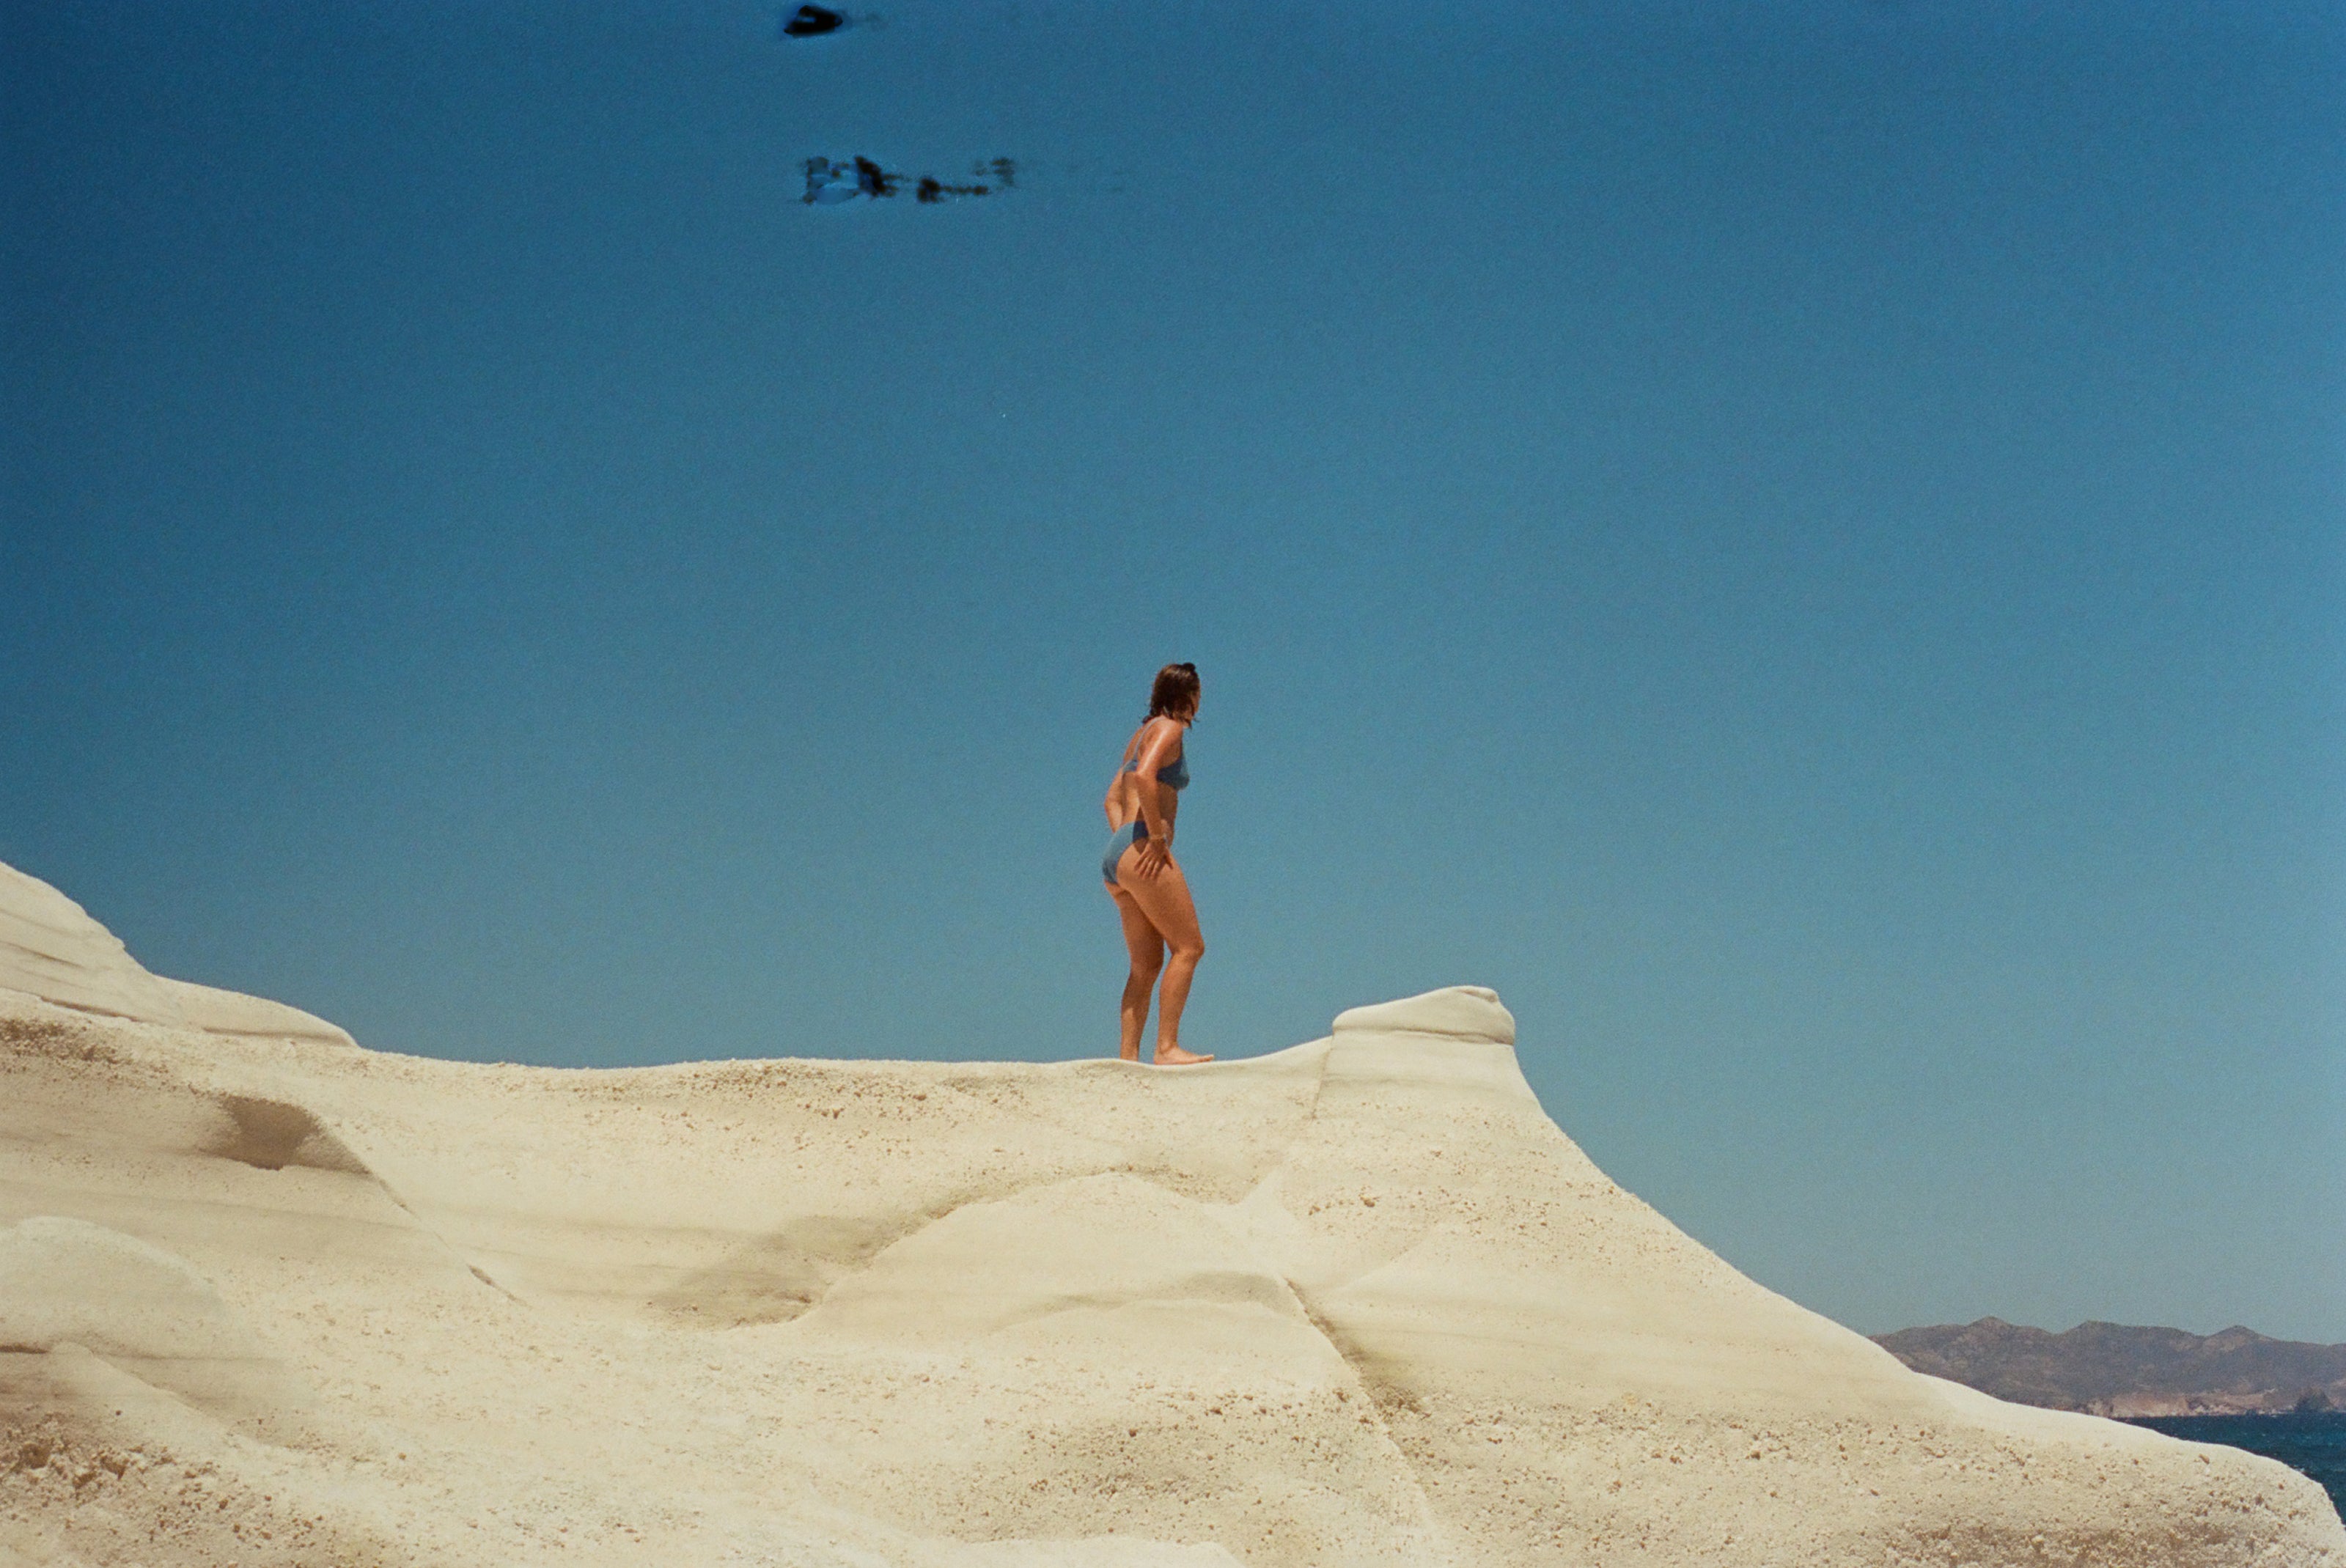 a person in a garment standing on a sand dune